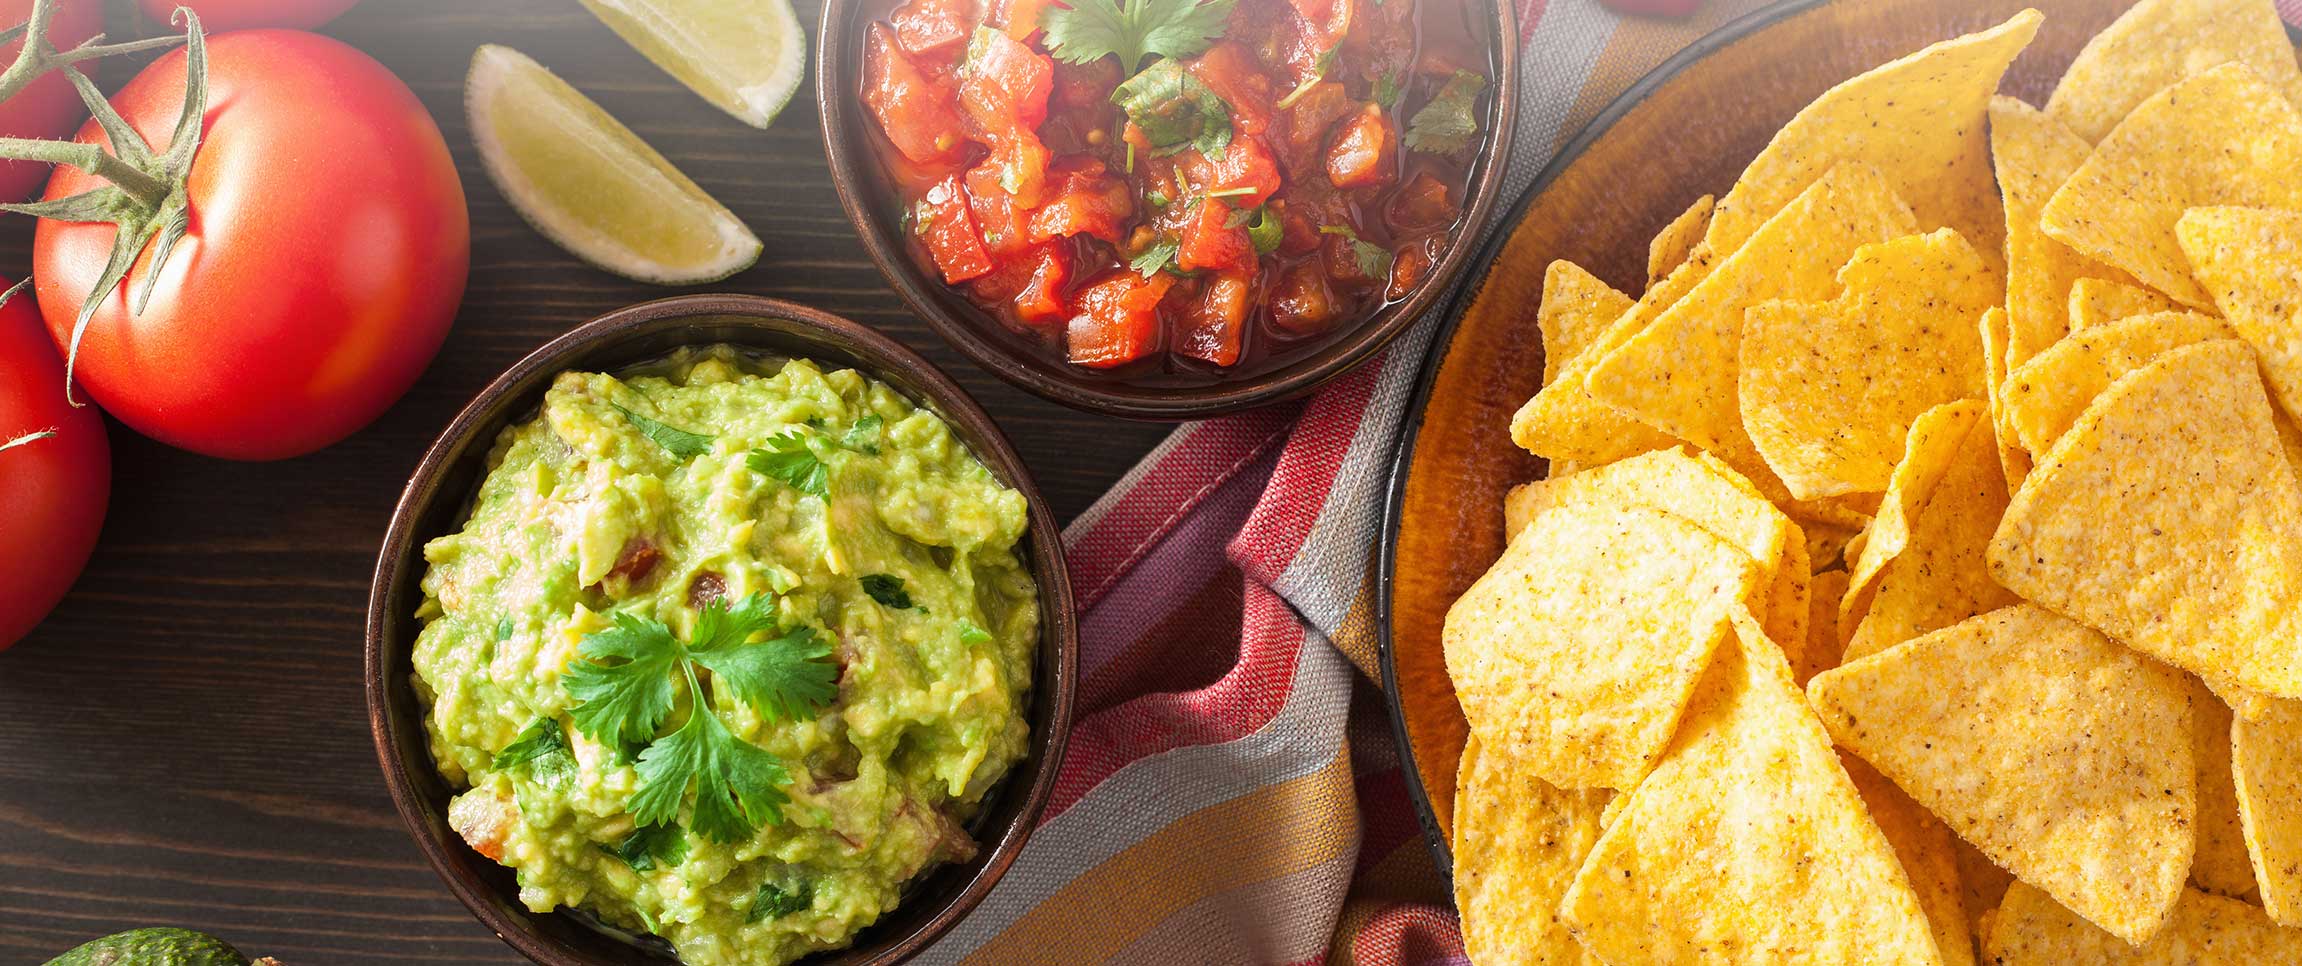 Chips and Dip - A Takeout Fiesta